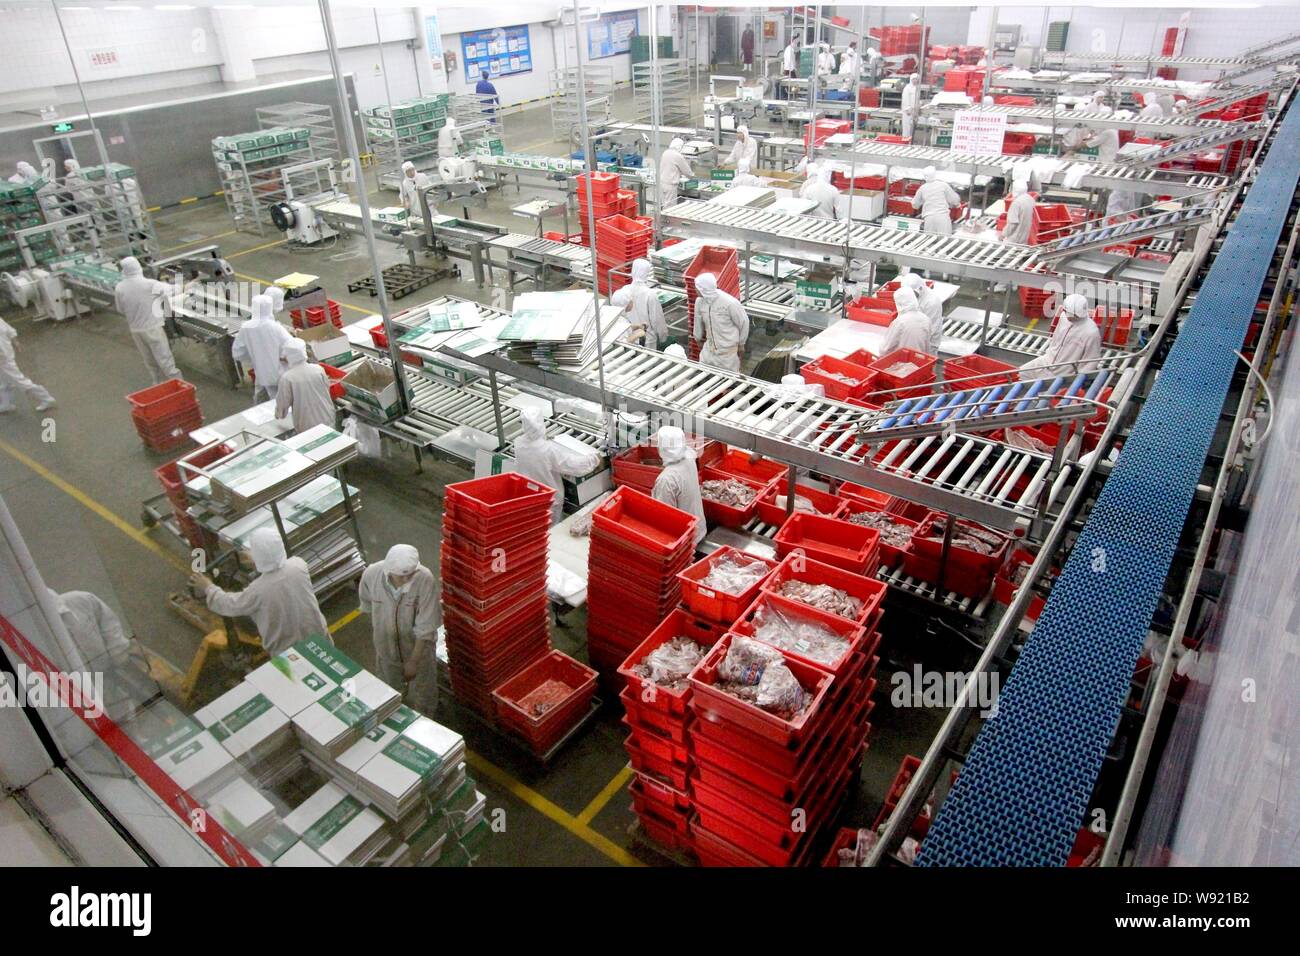 Buy Wholesale China Industrial Meat Food Processing Equipment Meat